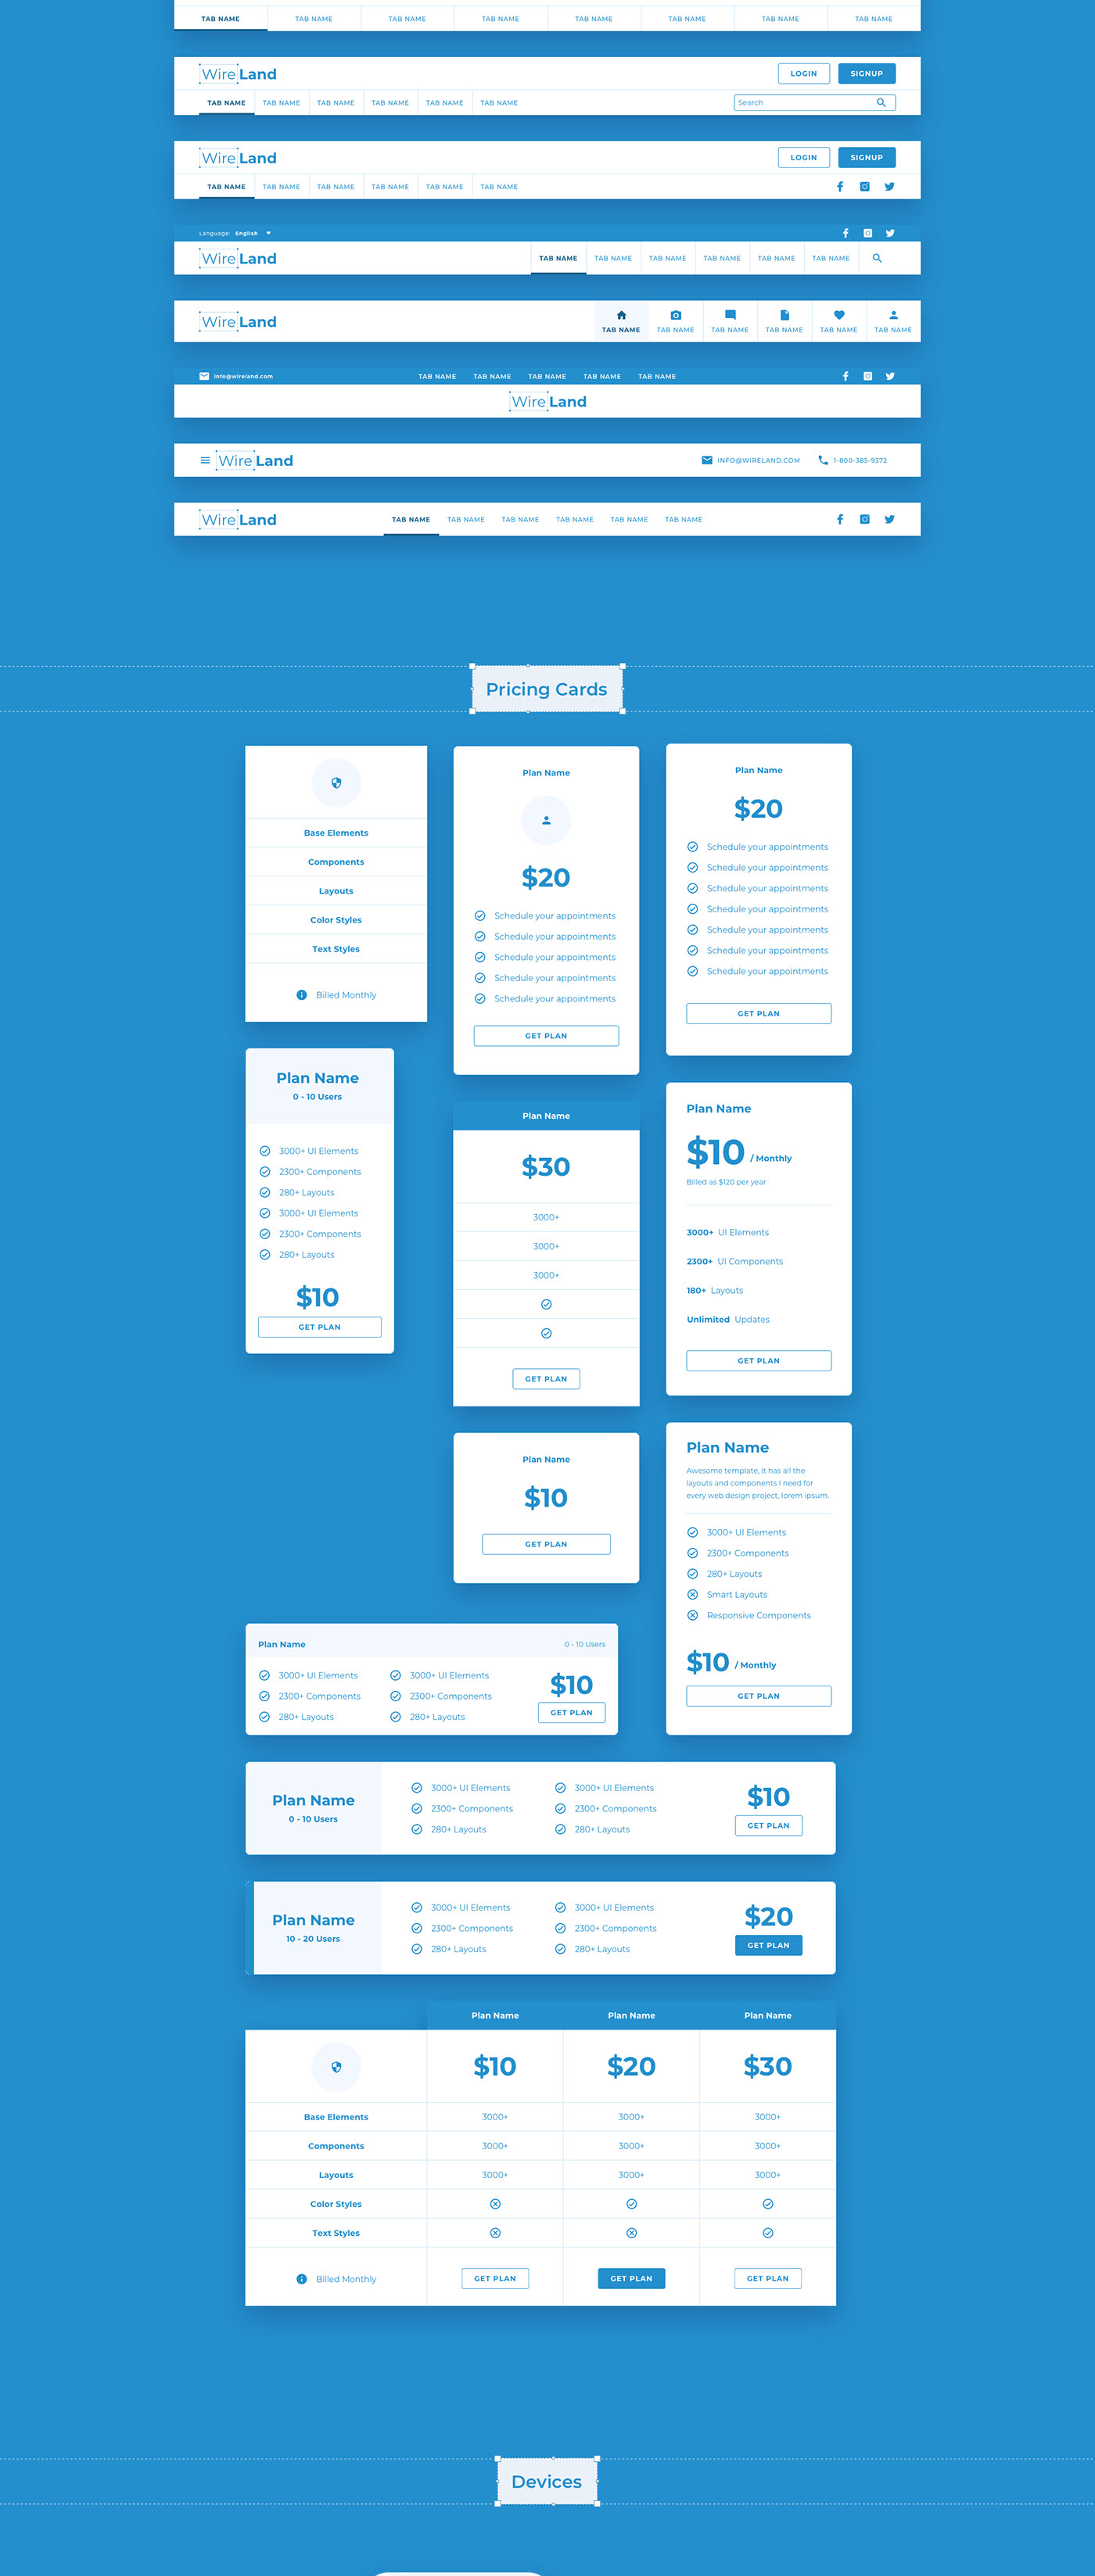 726d0e57728315.5f82276d39f8e - Wireland - Wireframe Library for Web Design Projects - Sketch Template